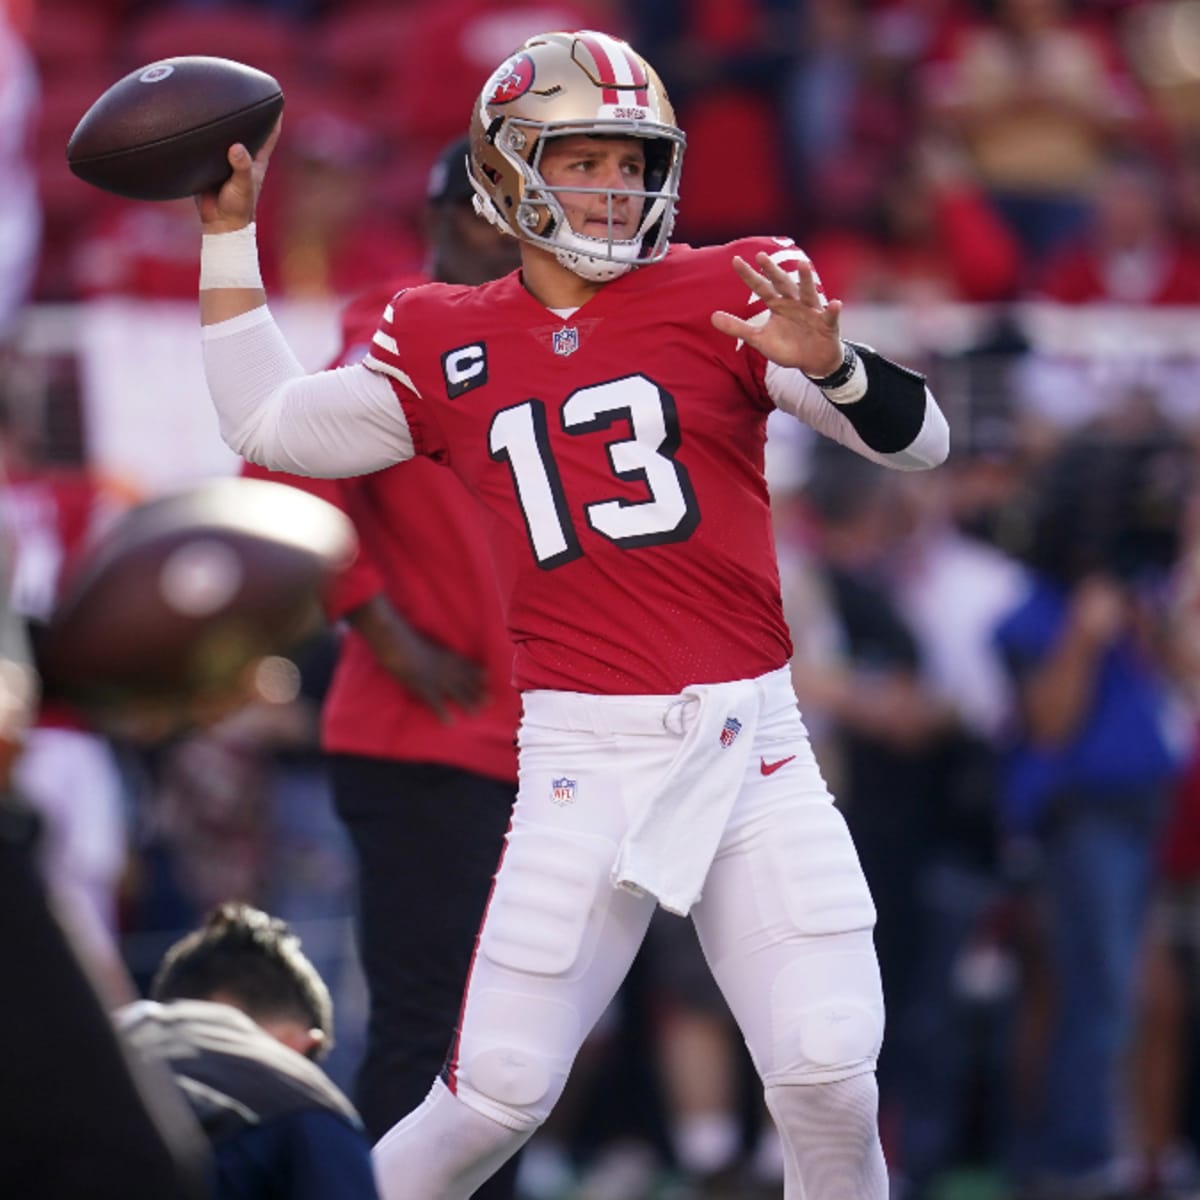 Will the 49ers Cage the Cardinals to Remain Undefeated? - Sports